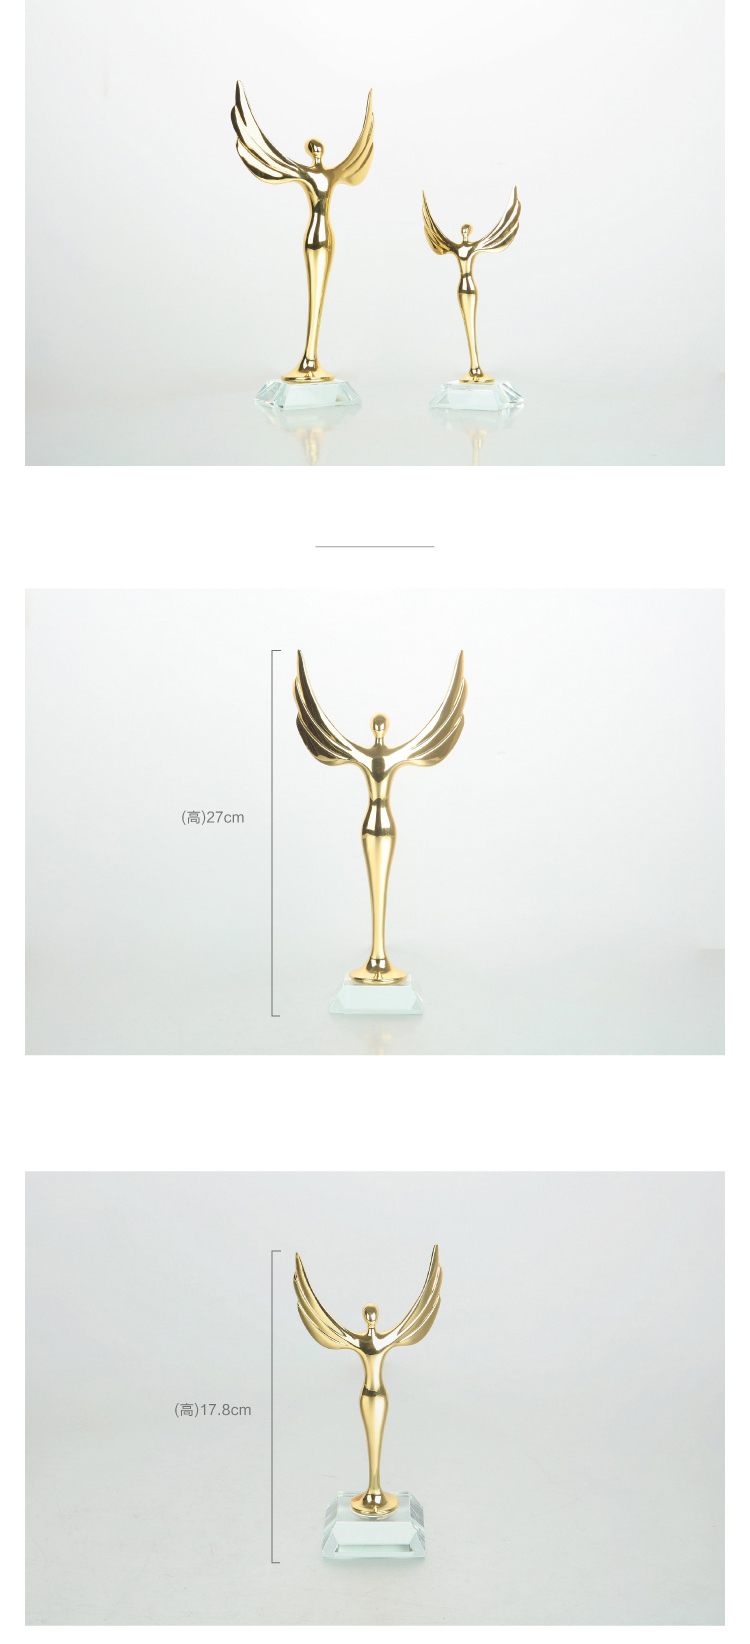 Modern Home Statues Sculpture An Abstract Little Freedom Golden Man For Decoration Accessories Crystal Ornaments Home Decor Gift